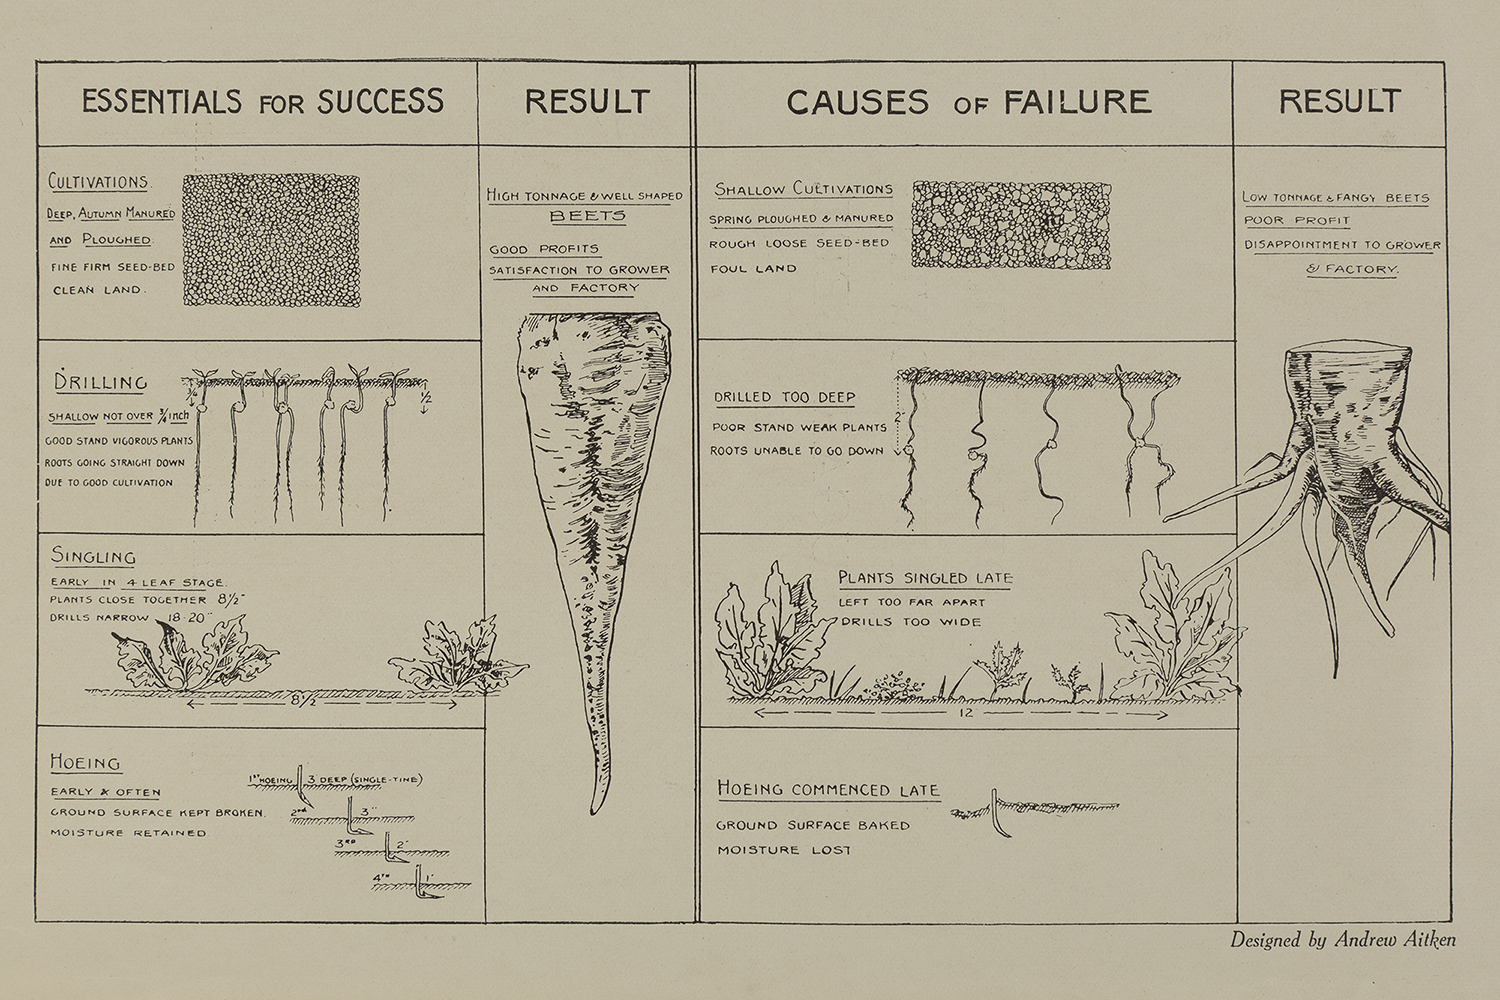 Image of part of a vintage leaflet from 'Pictorial Hints on the Growing of Sugar Beet' (Presented by the Beet Sugar Factories of Great Britain'.